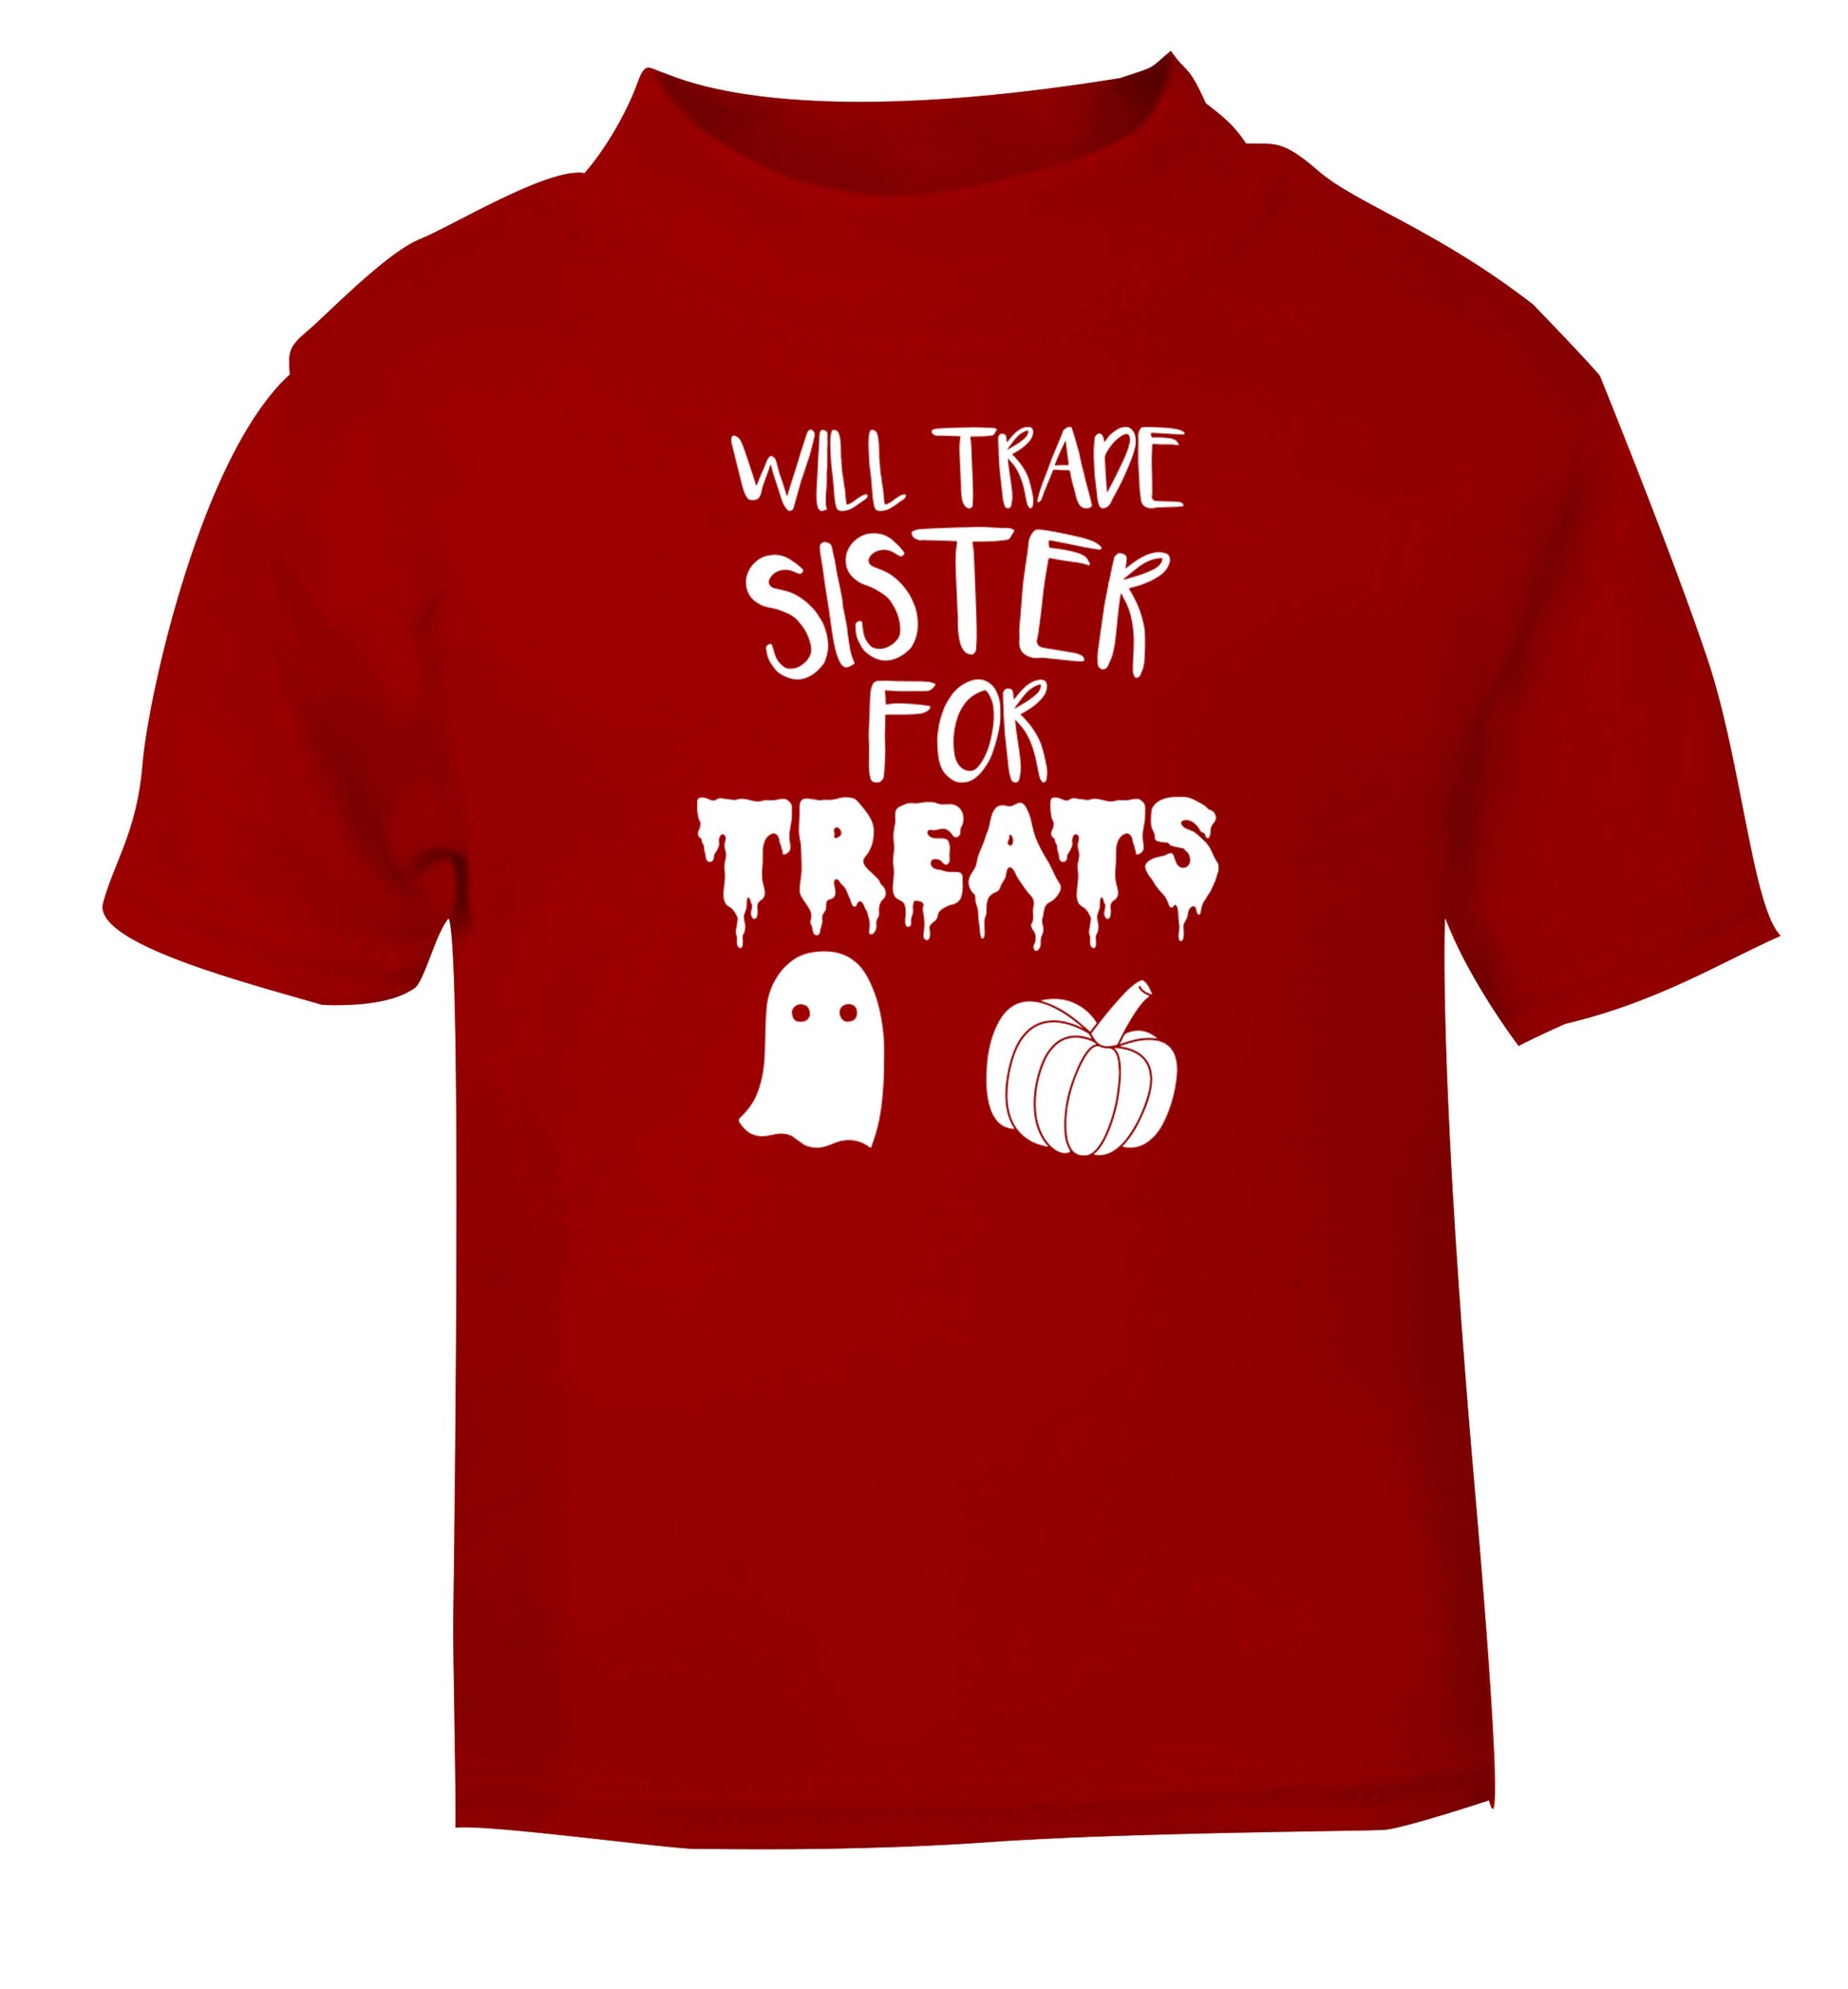 Will trade sister for treats red Baby Toddler Tshirt 2 Years